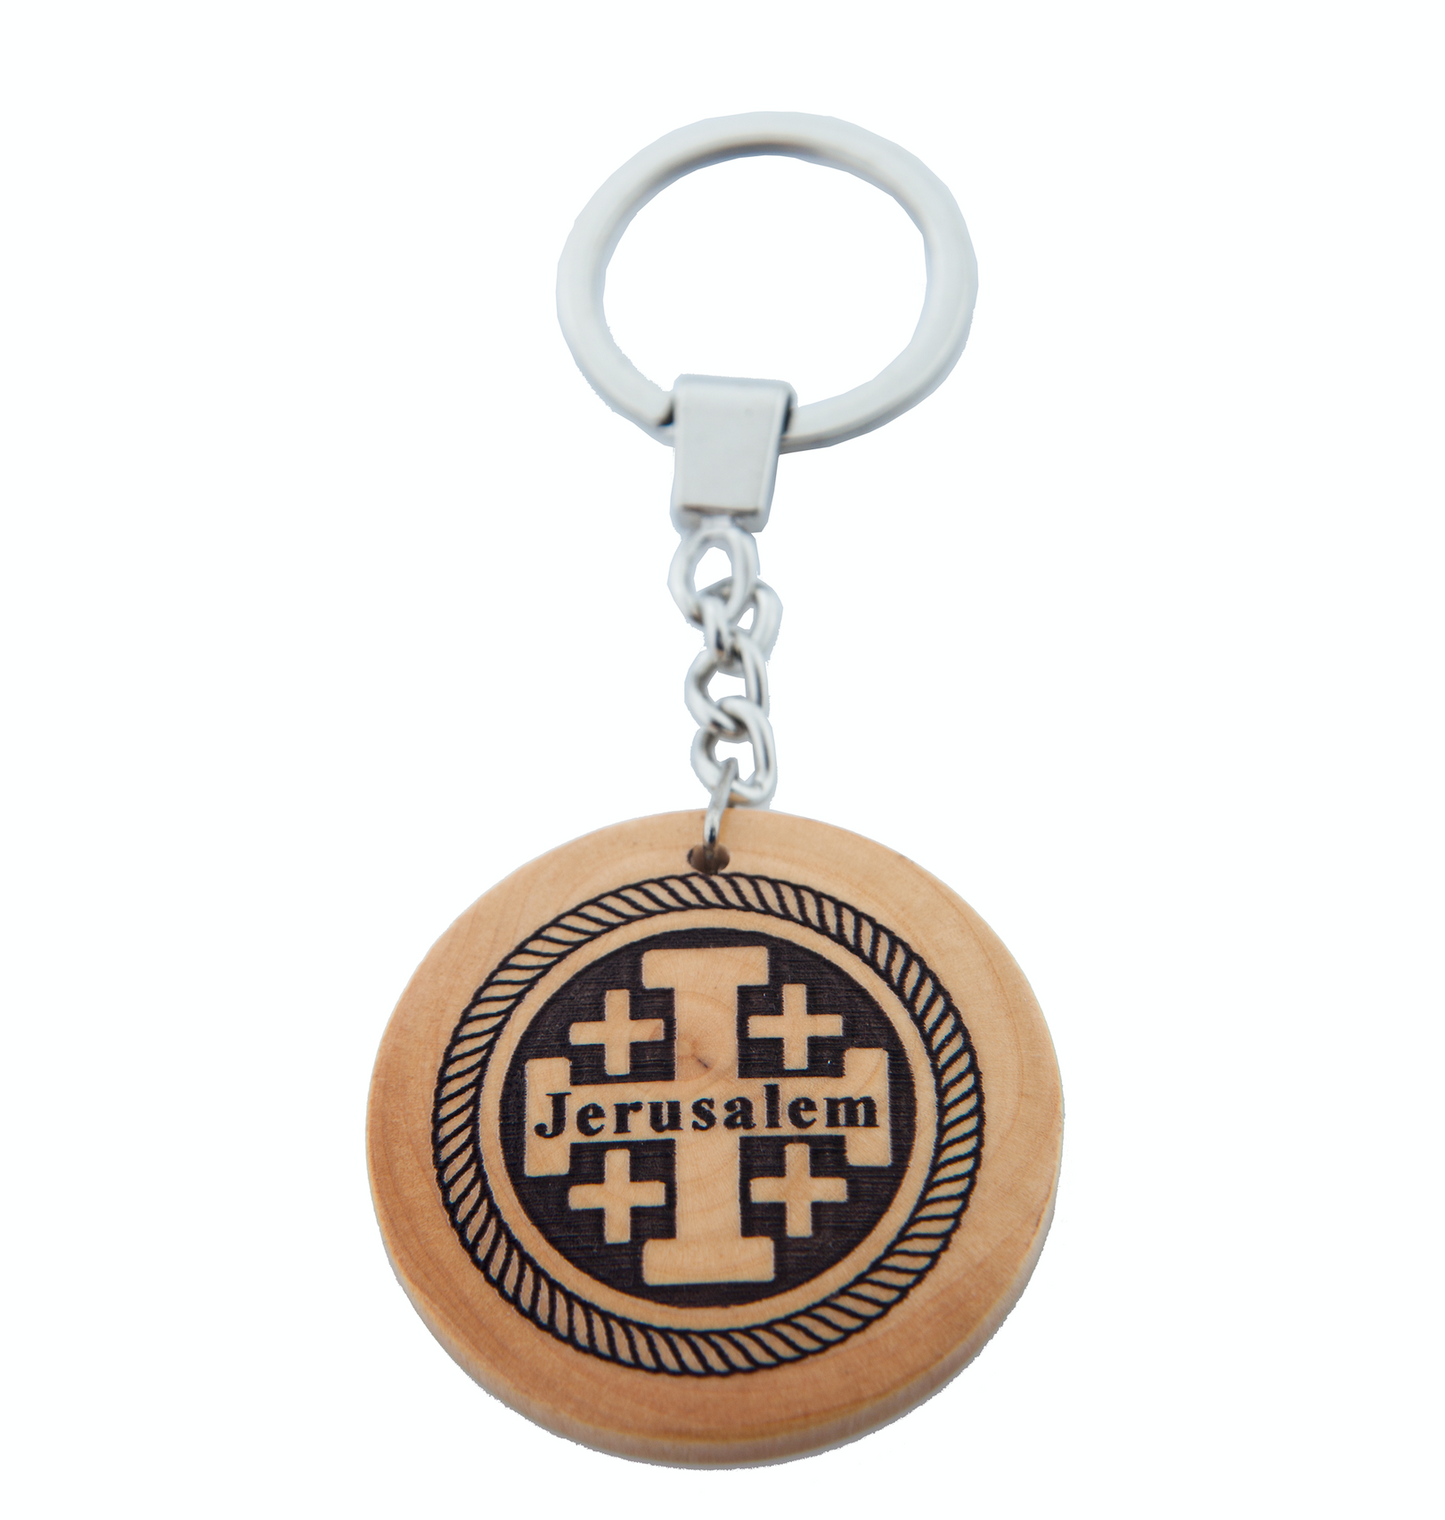 Four Hearts Cross Keychain in Olive Wood - Holy Land Gift Shop